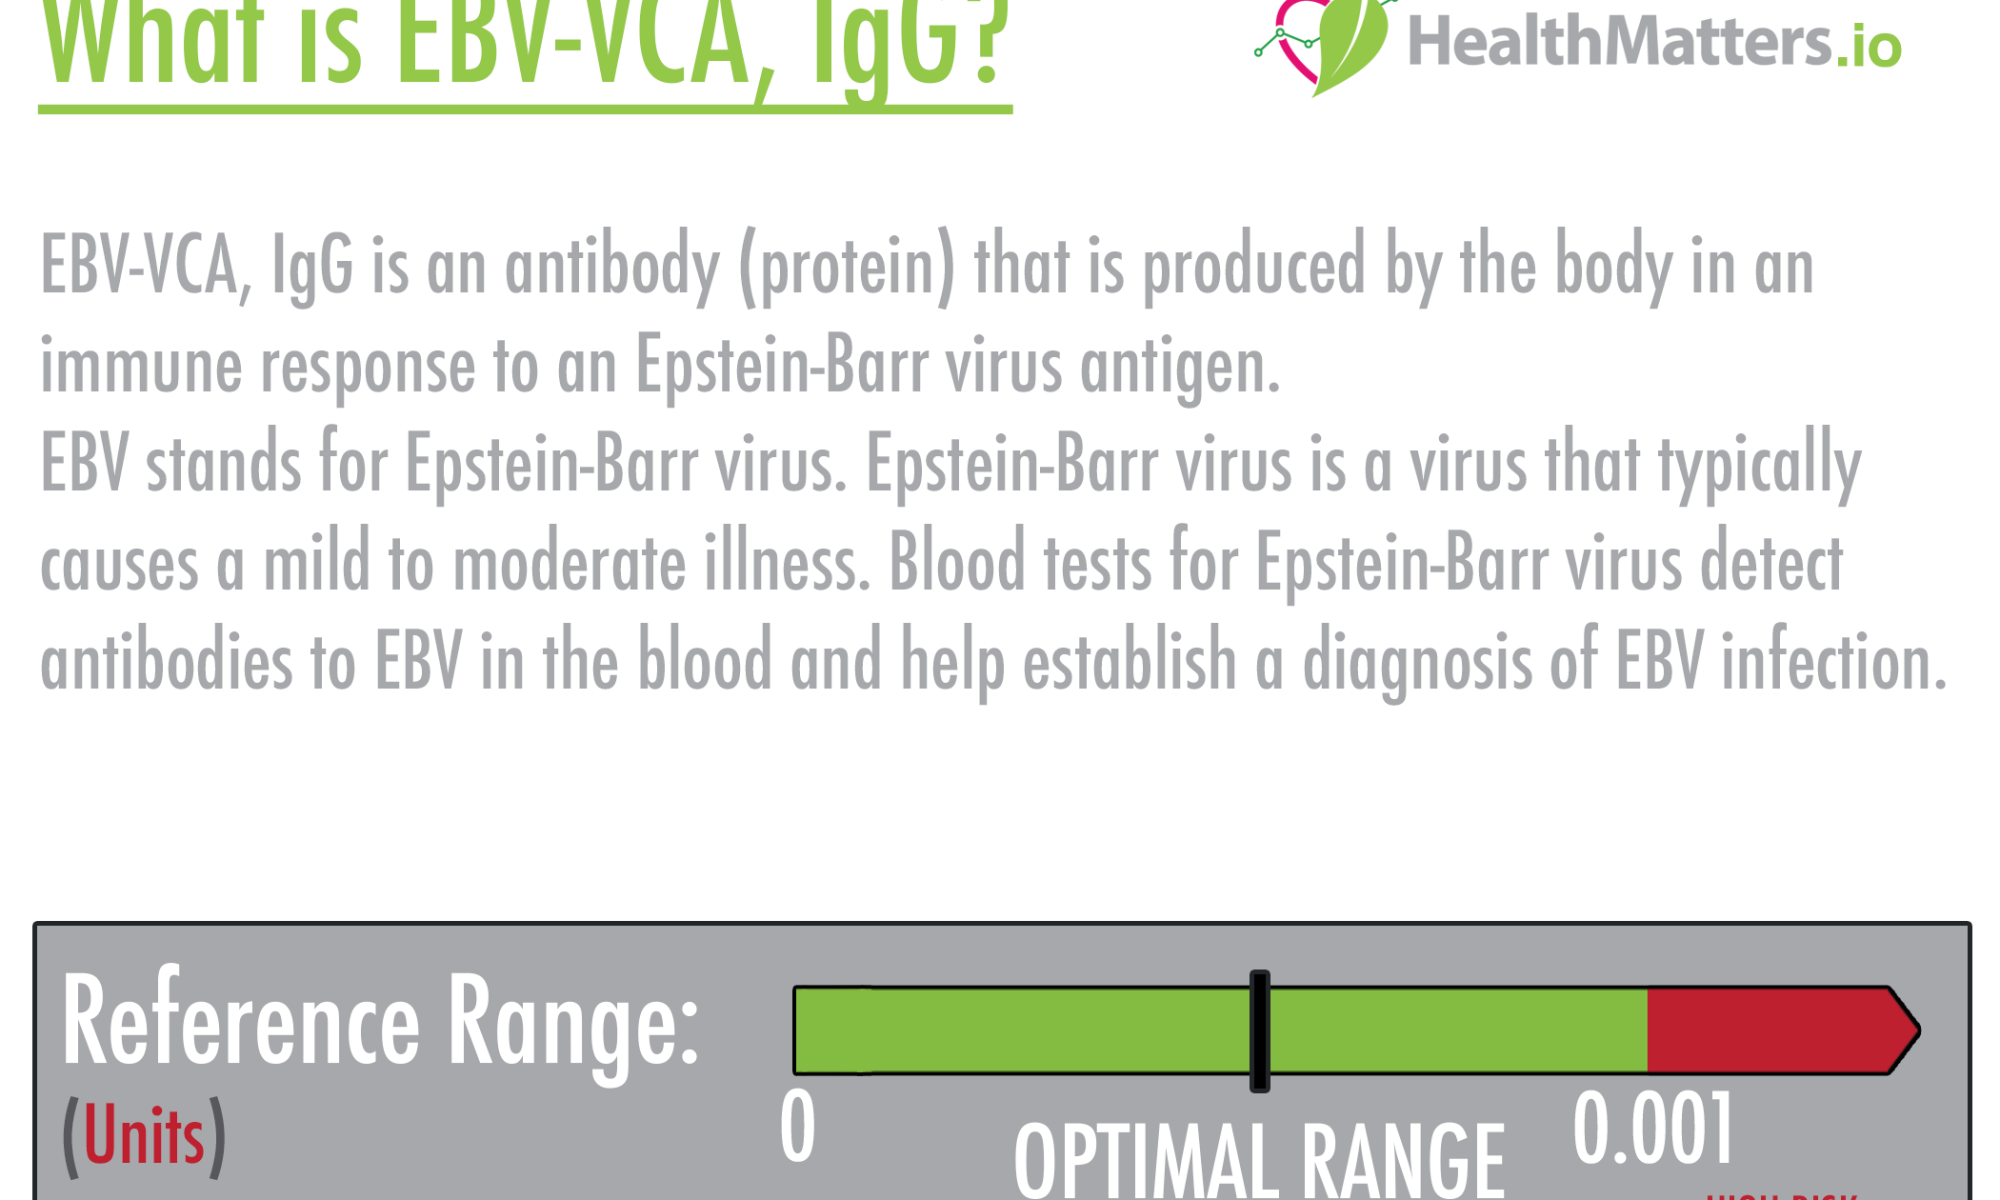 EBV-VCA, IgG EBV-VCA, IgG is an antibody (protein) that is produced by the body in an immune response to an Epstein-Barr virus antigen. EBV stands for Epstein-Barr virus. Epstein-Barr virus is a virus that typically causes a mild to moderate illness. Blood tests for Epstein-Barr virus detect antibodies to EBV in the blood and help establish a diagnosis of EBV infection.